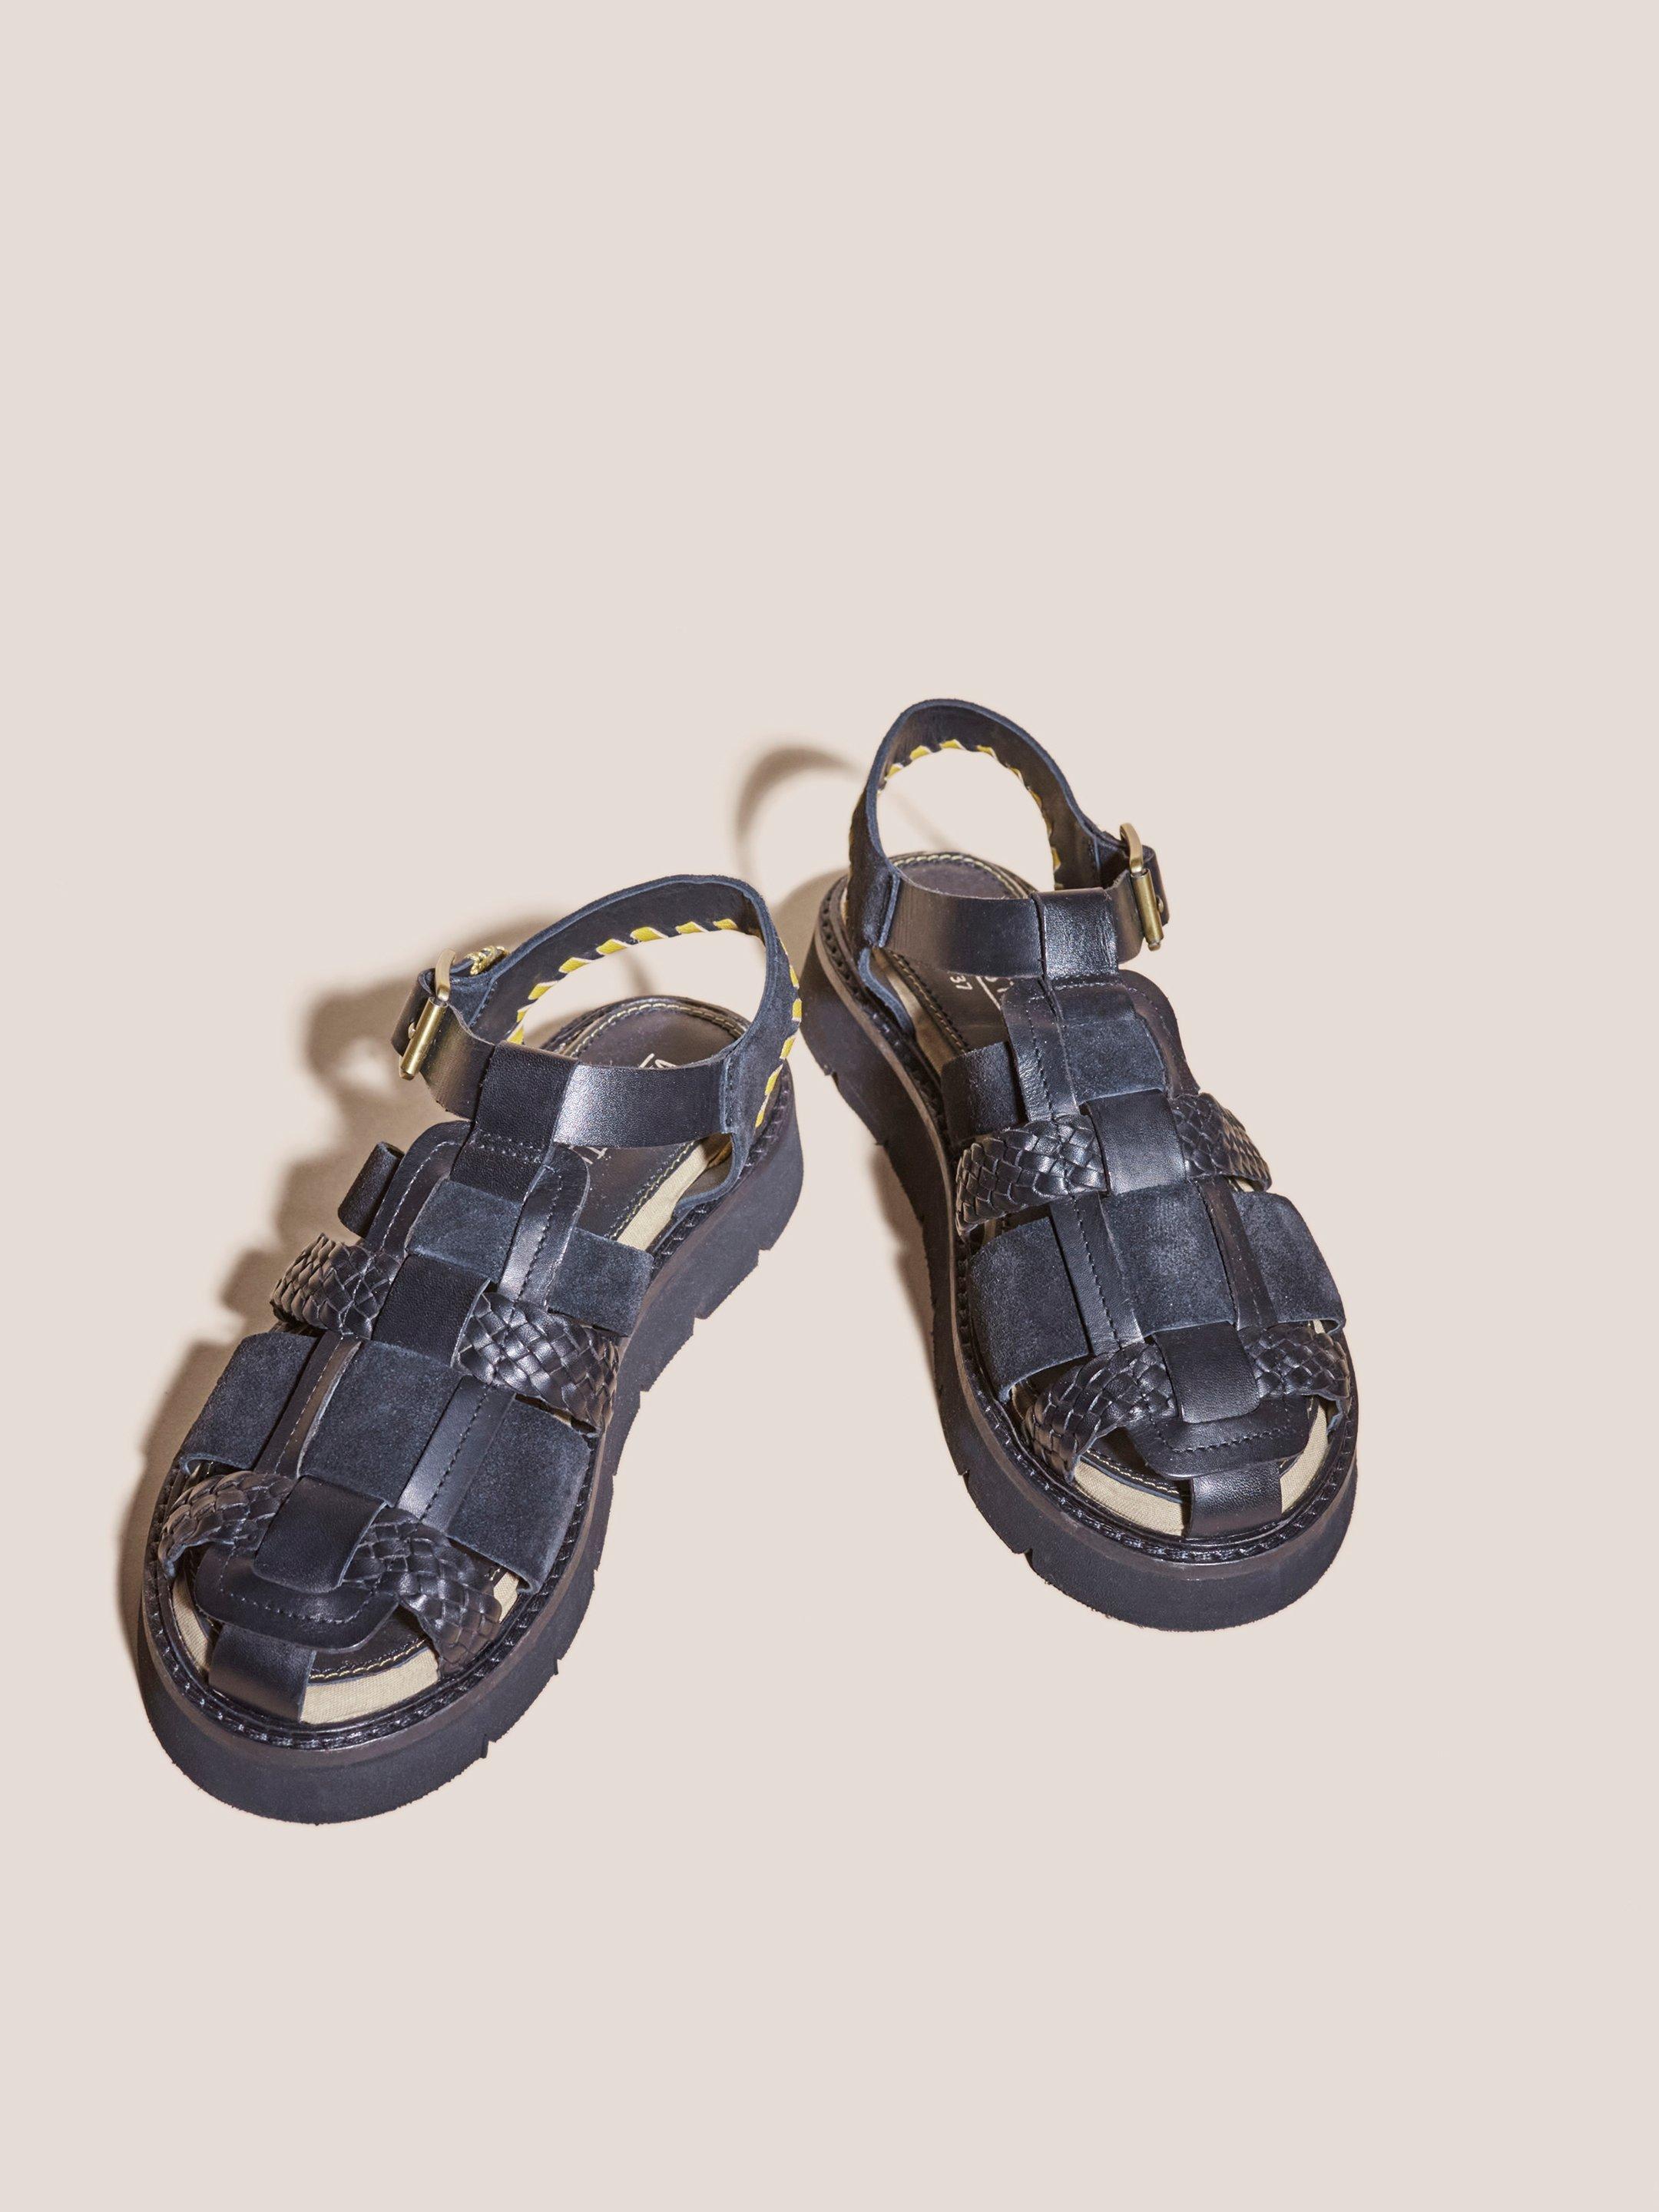 Chunky Fisherman Sandal in BLK MLT - FLAT FRONT